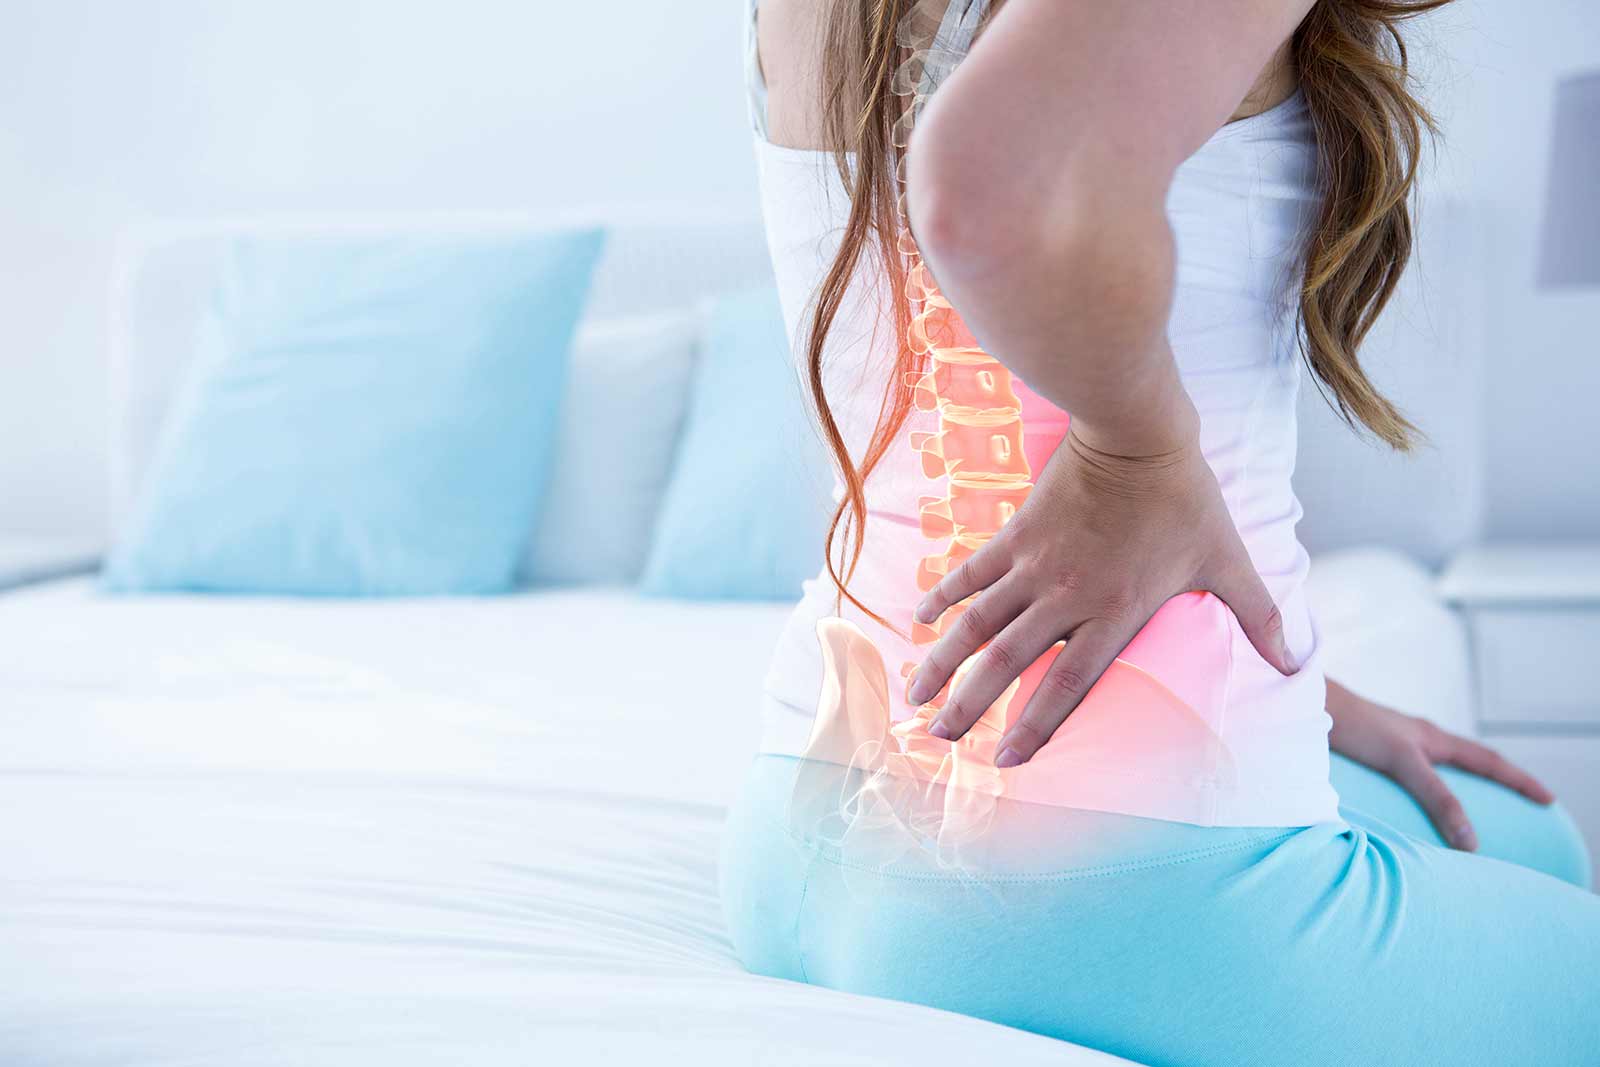 Spondylolisthesis – What You Should Know About This Condition